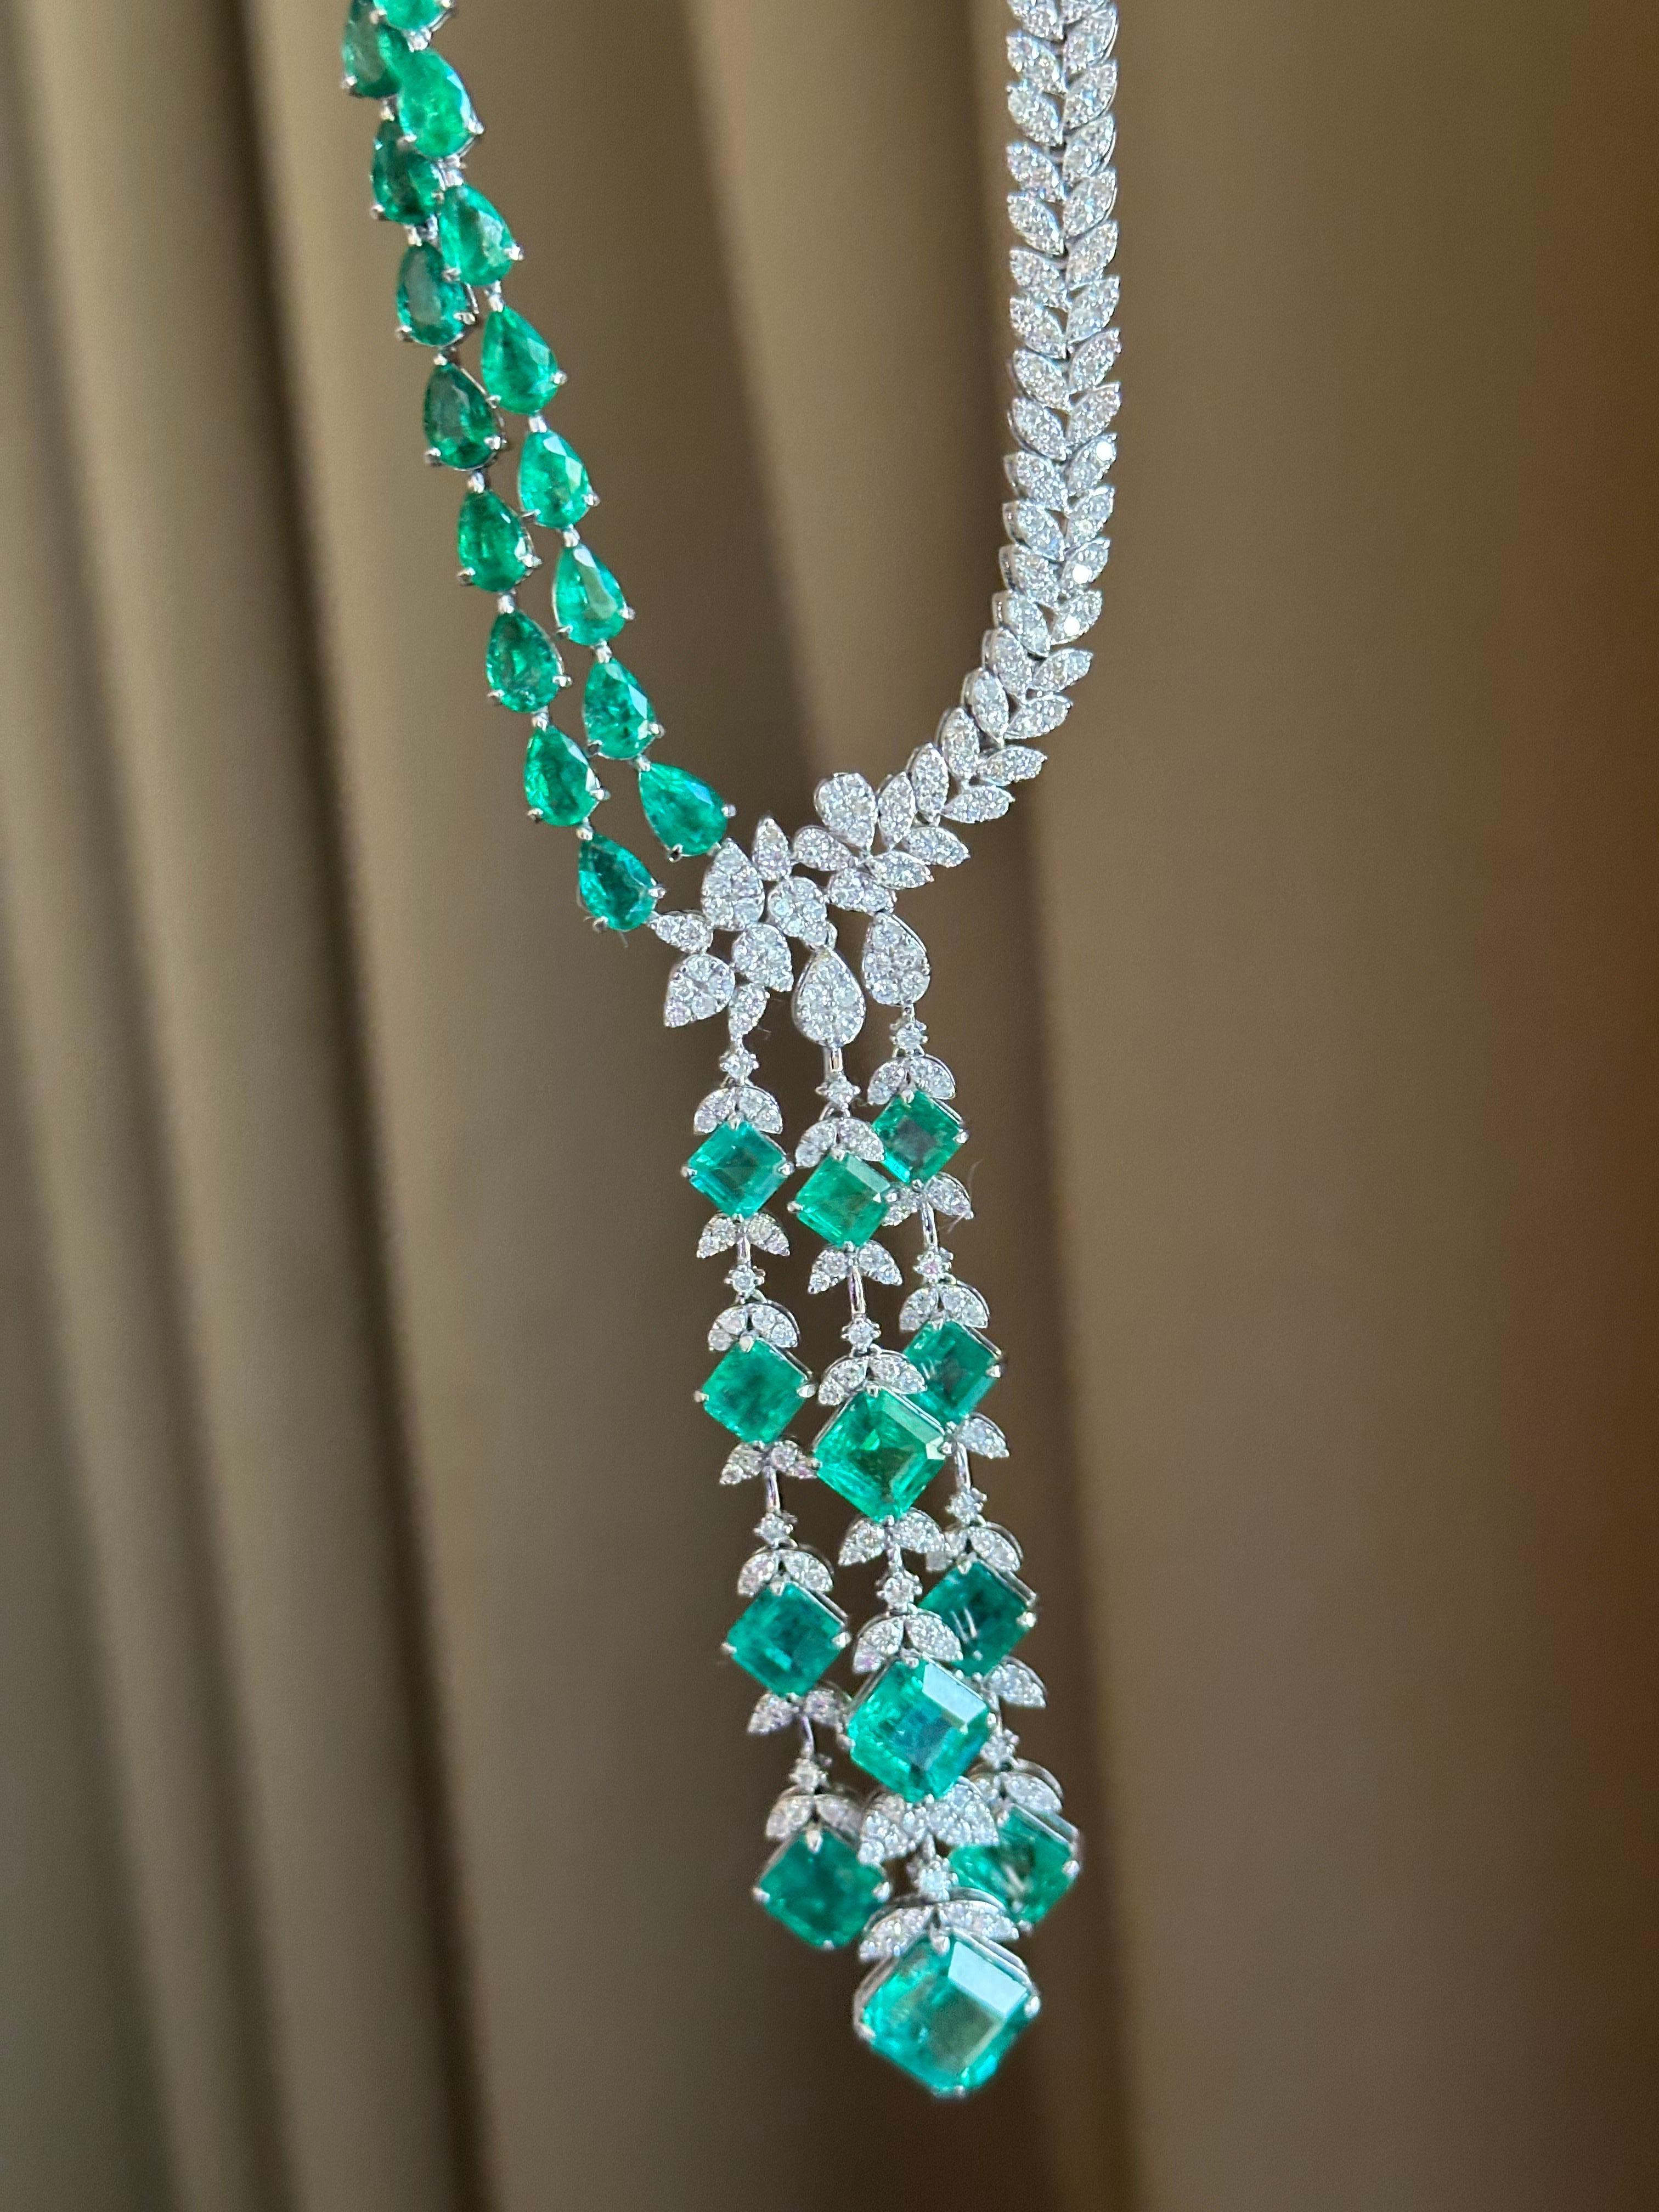 22.28 Carat Zambian Emerald 18 Karat White Gold Diamond Necklace In New Condition For Sale In Hoffman Estate, IL